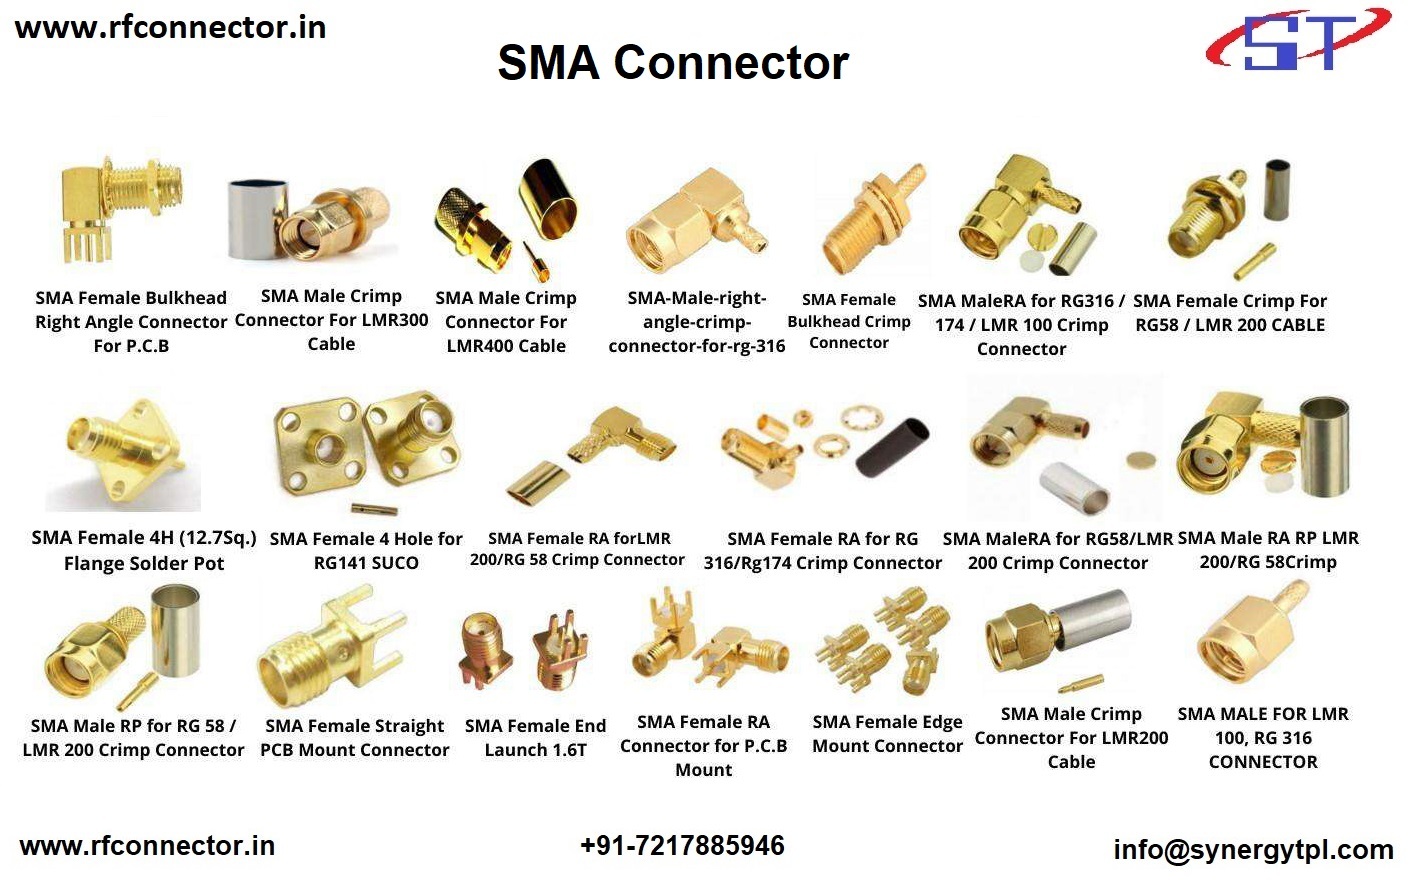 SMA Female 4 Hole Connector for RG 86 cable